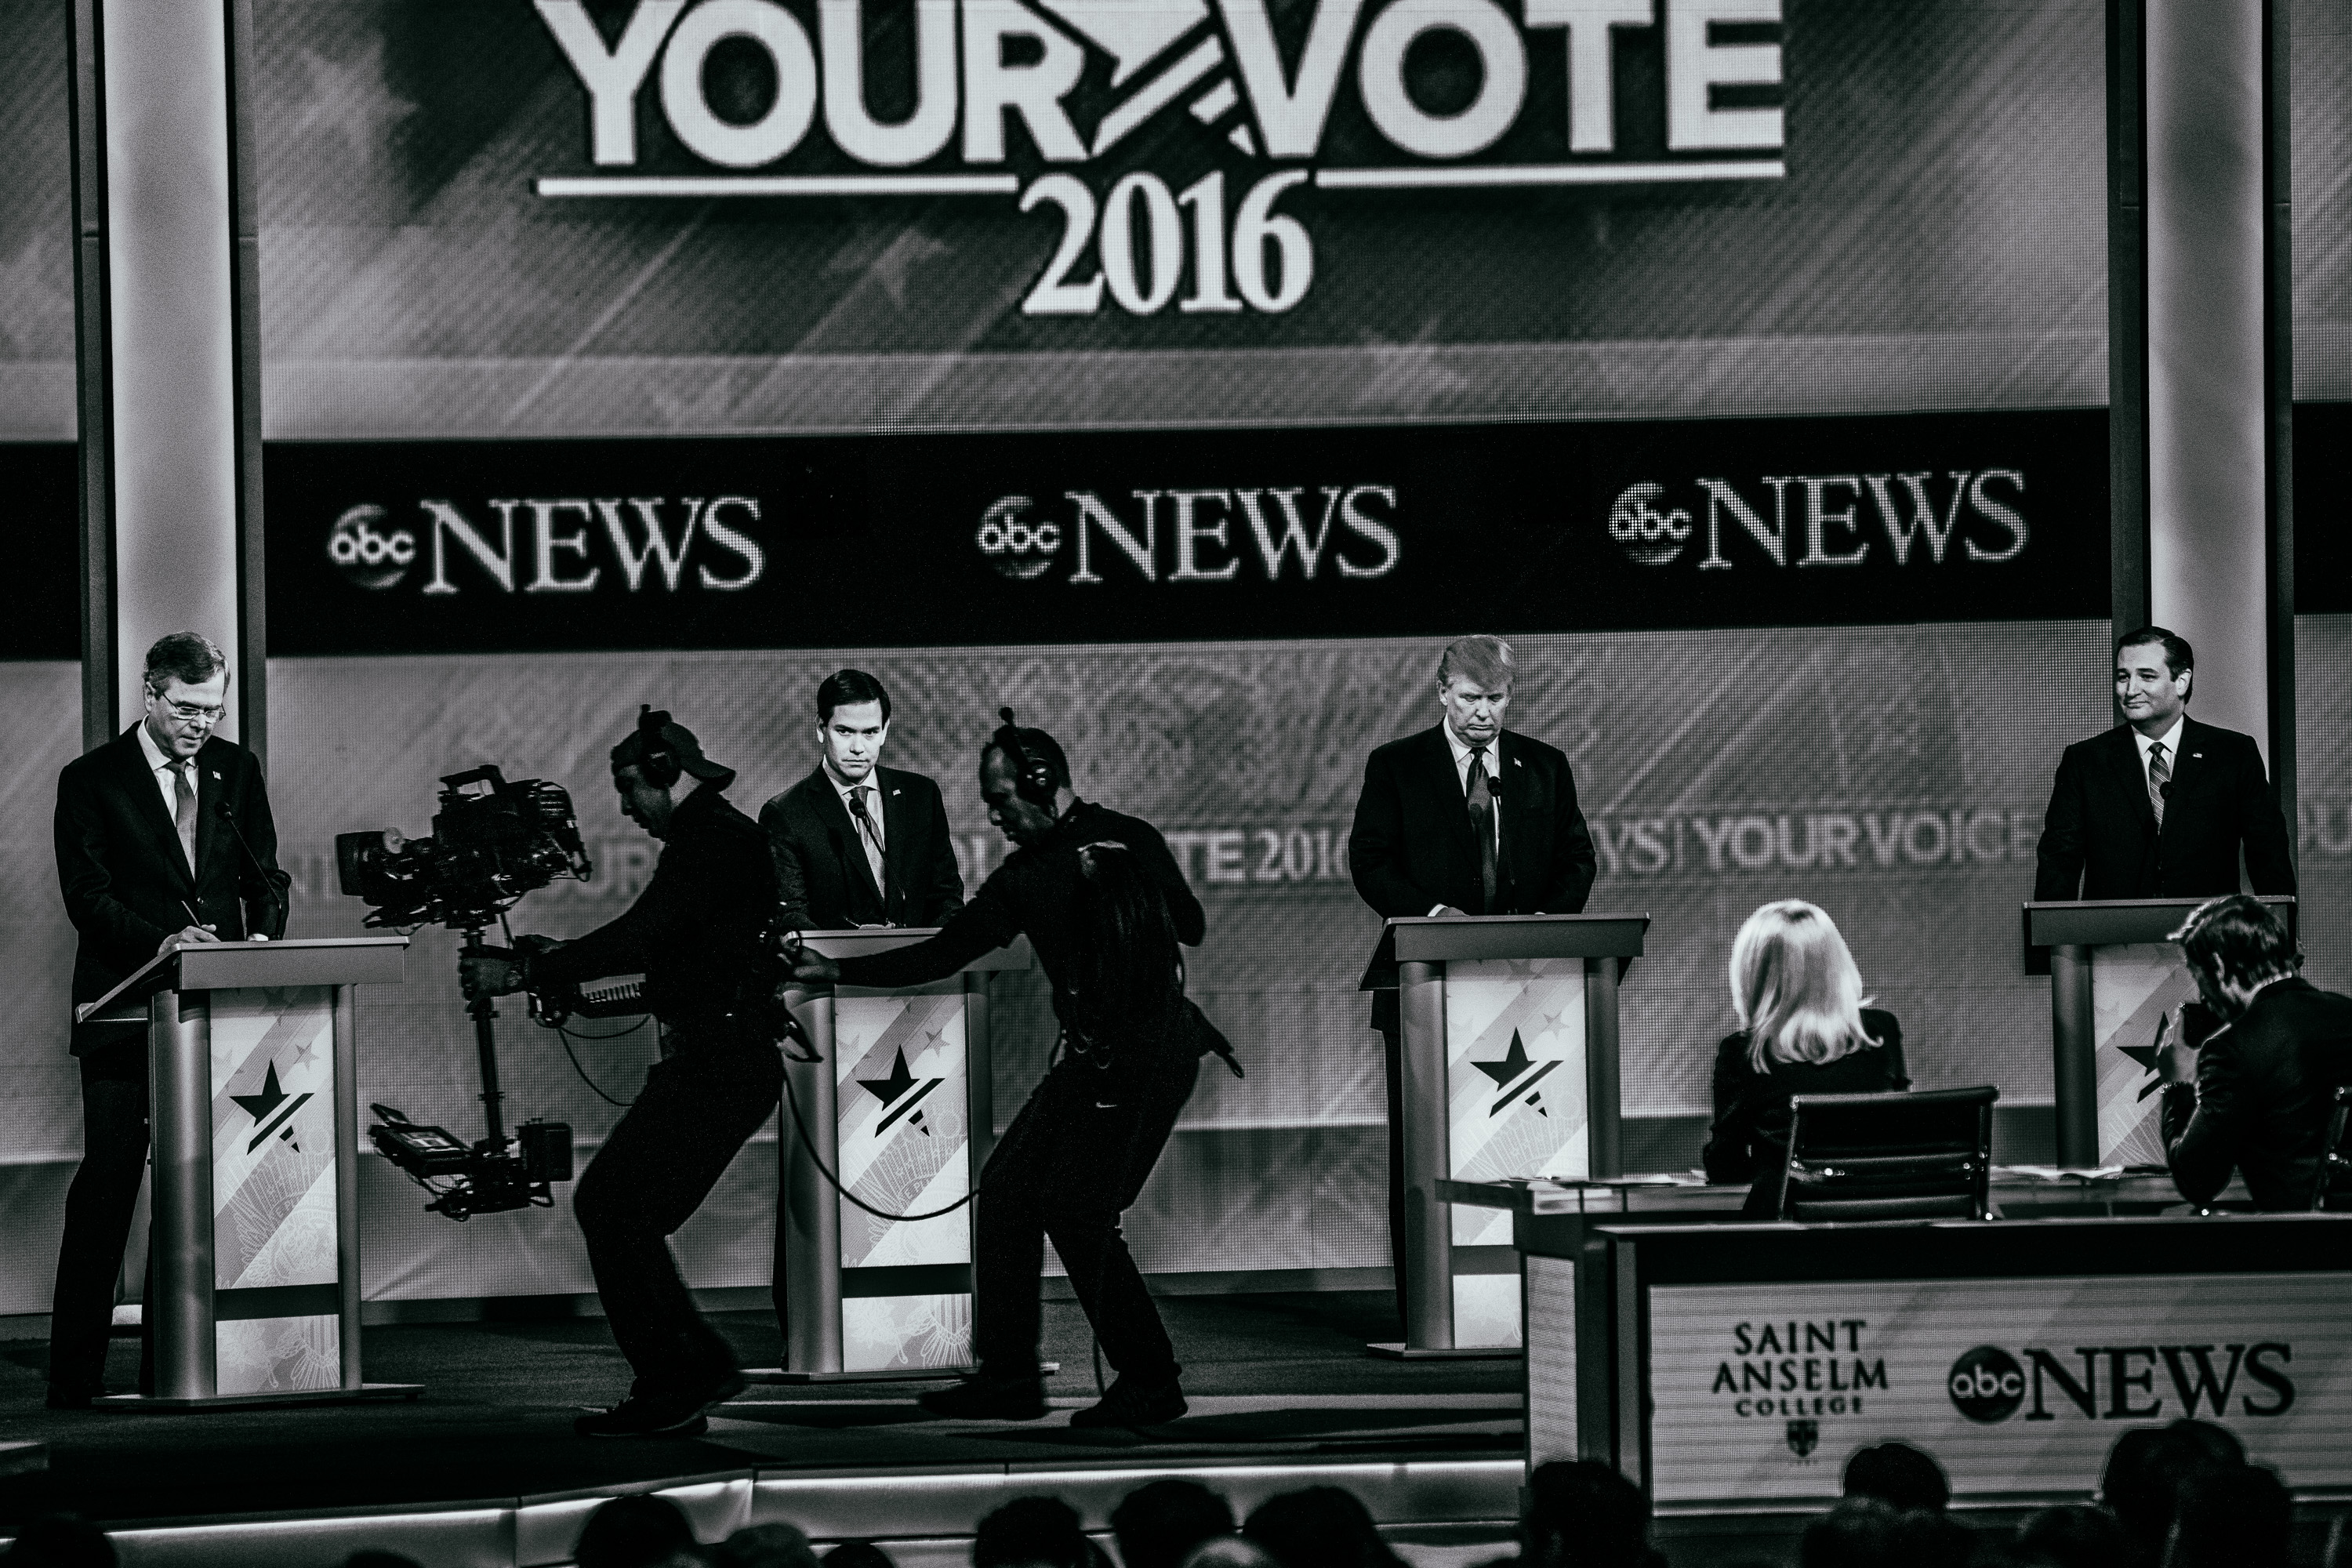 Republican presidential candidates, from left, Jeb Bush, Marco Rubio, Donald Trump and Ted Cruz appear during the Republican presidential debate on Feb. 6, 2016, in Manchester, N.H. (Nate Gowdy for TIME)